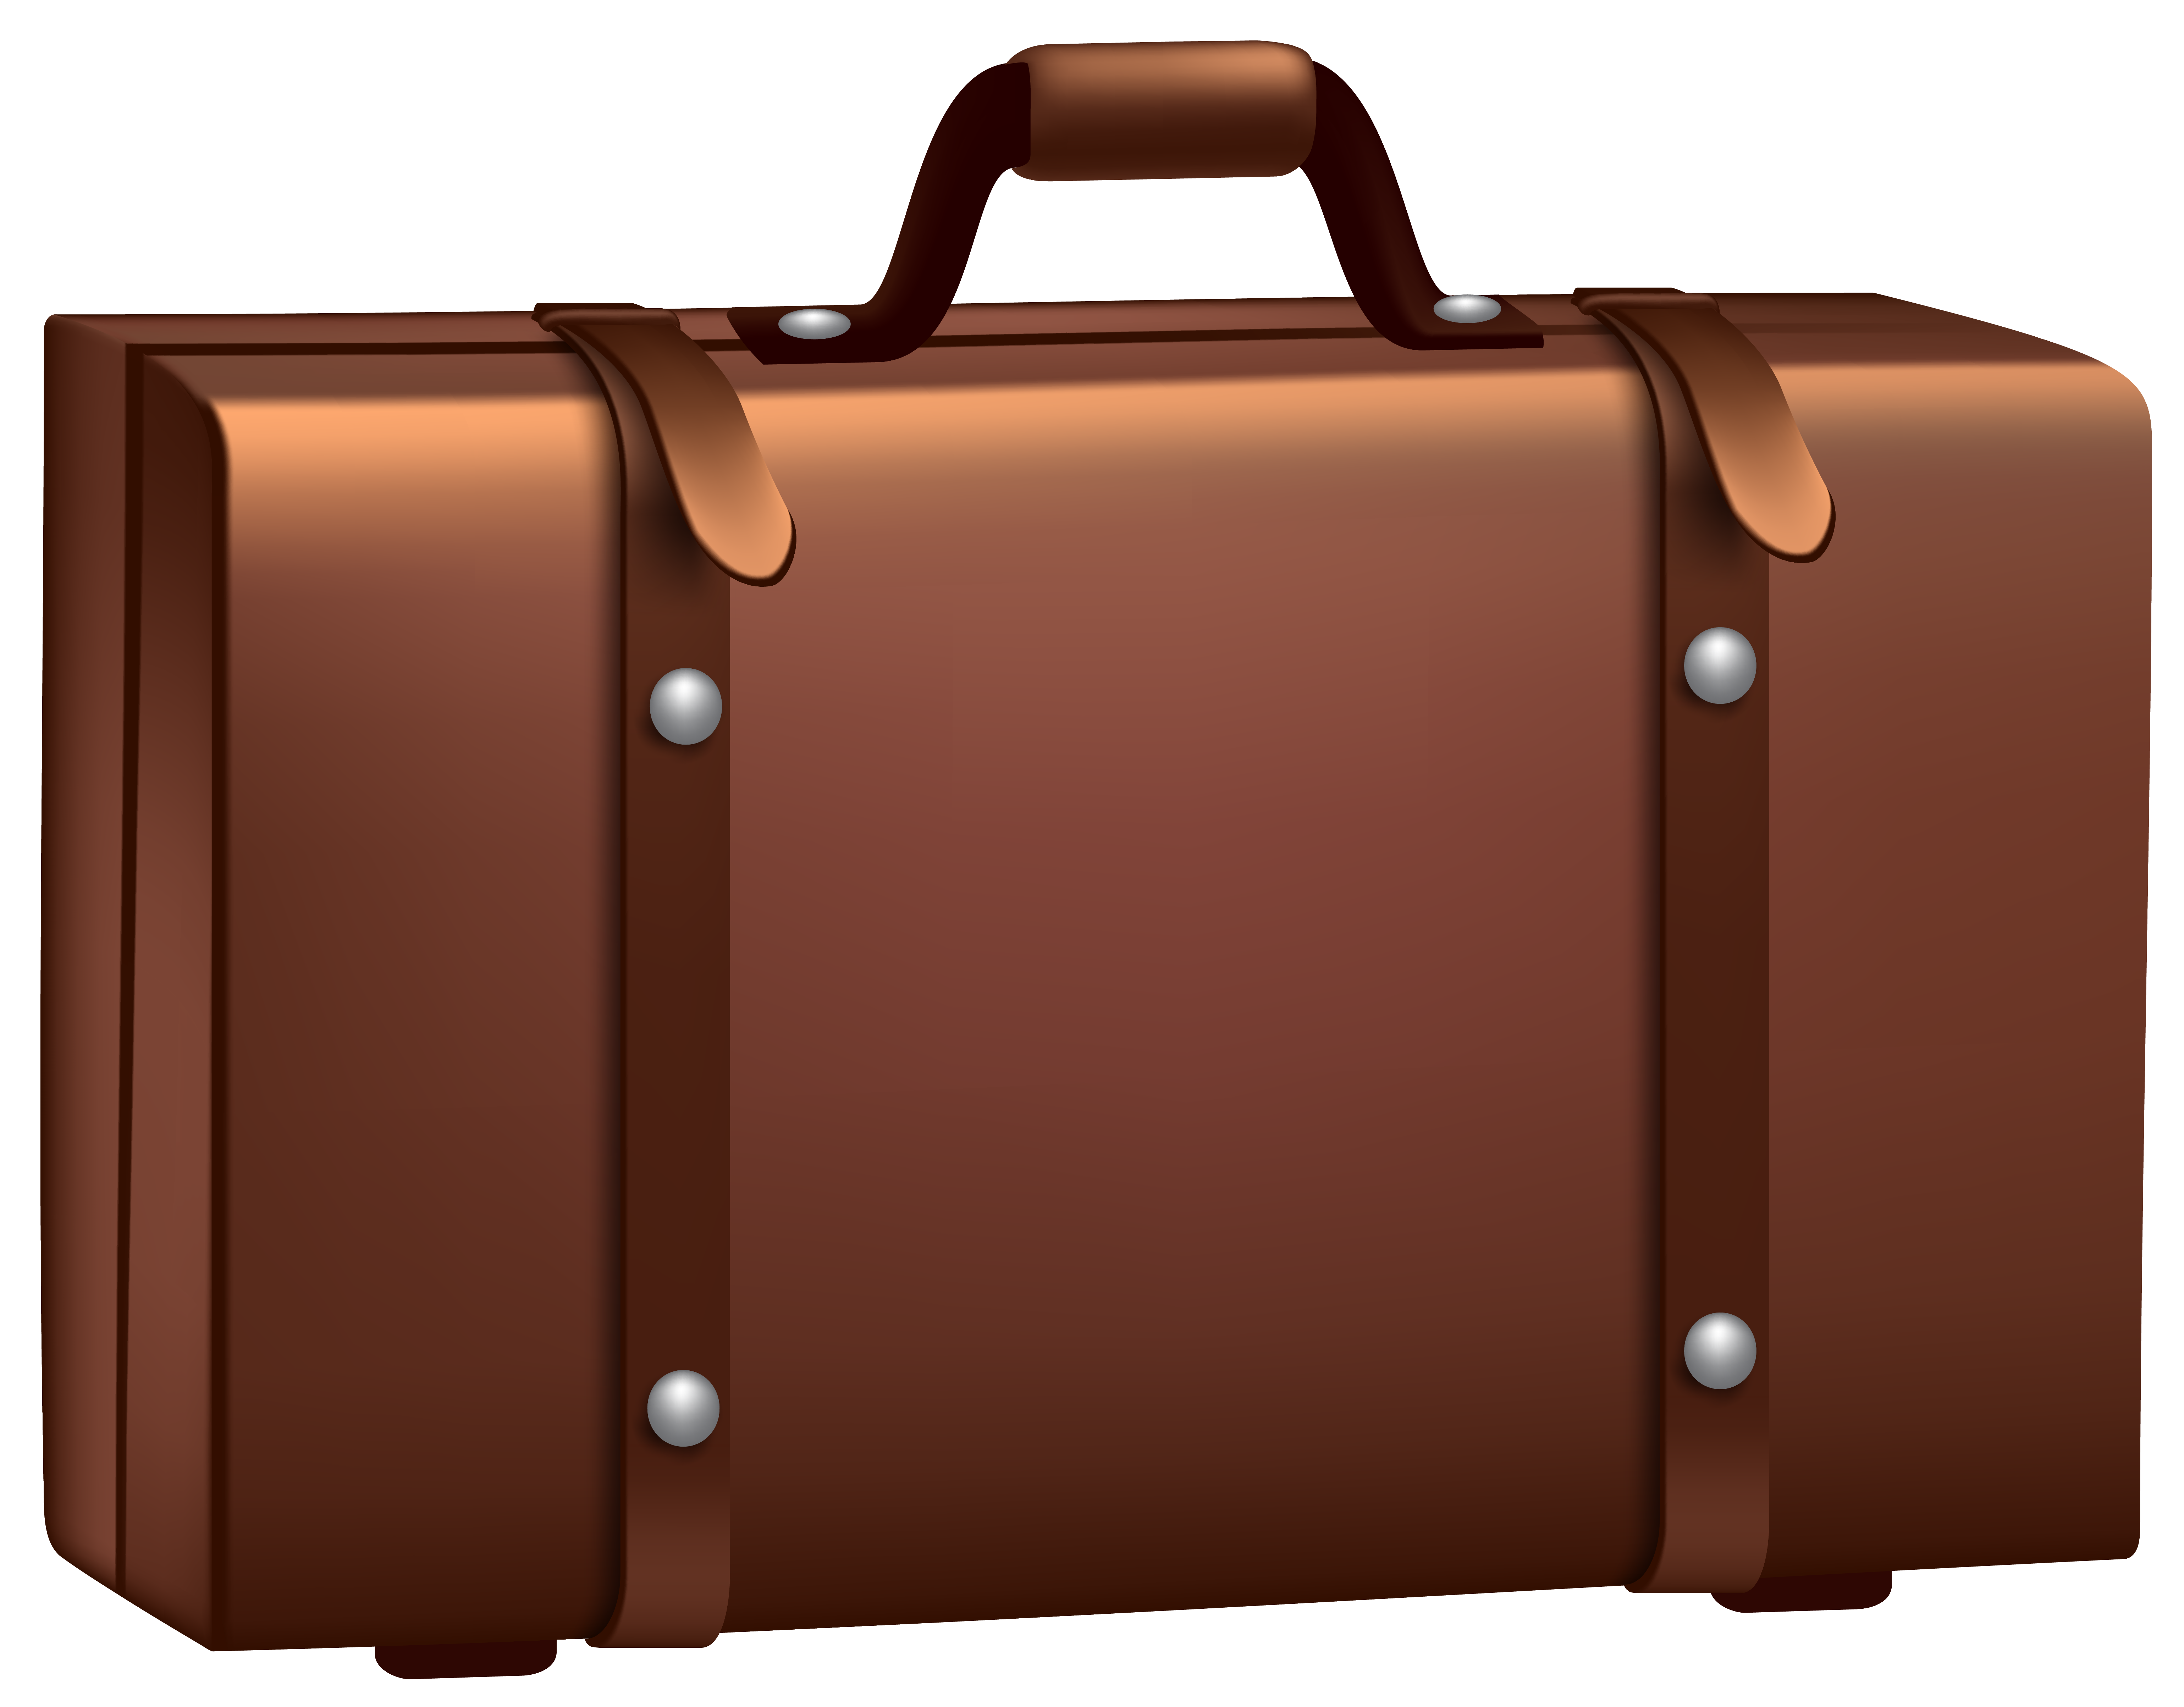 Suitcase clipart - Clipground